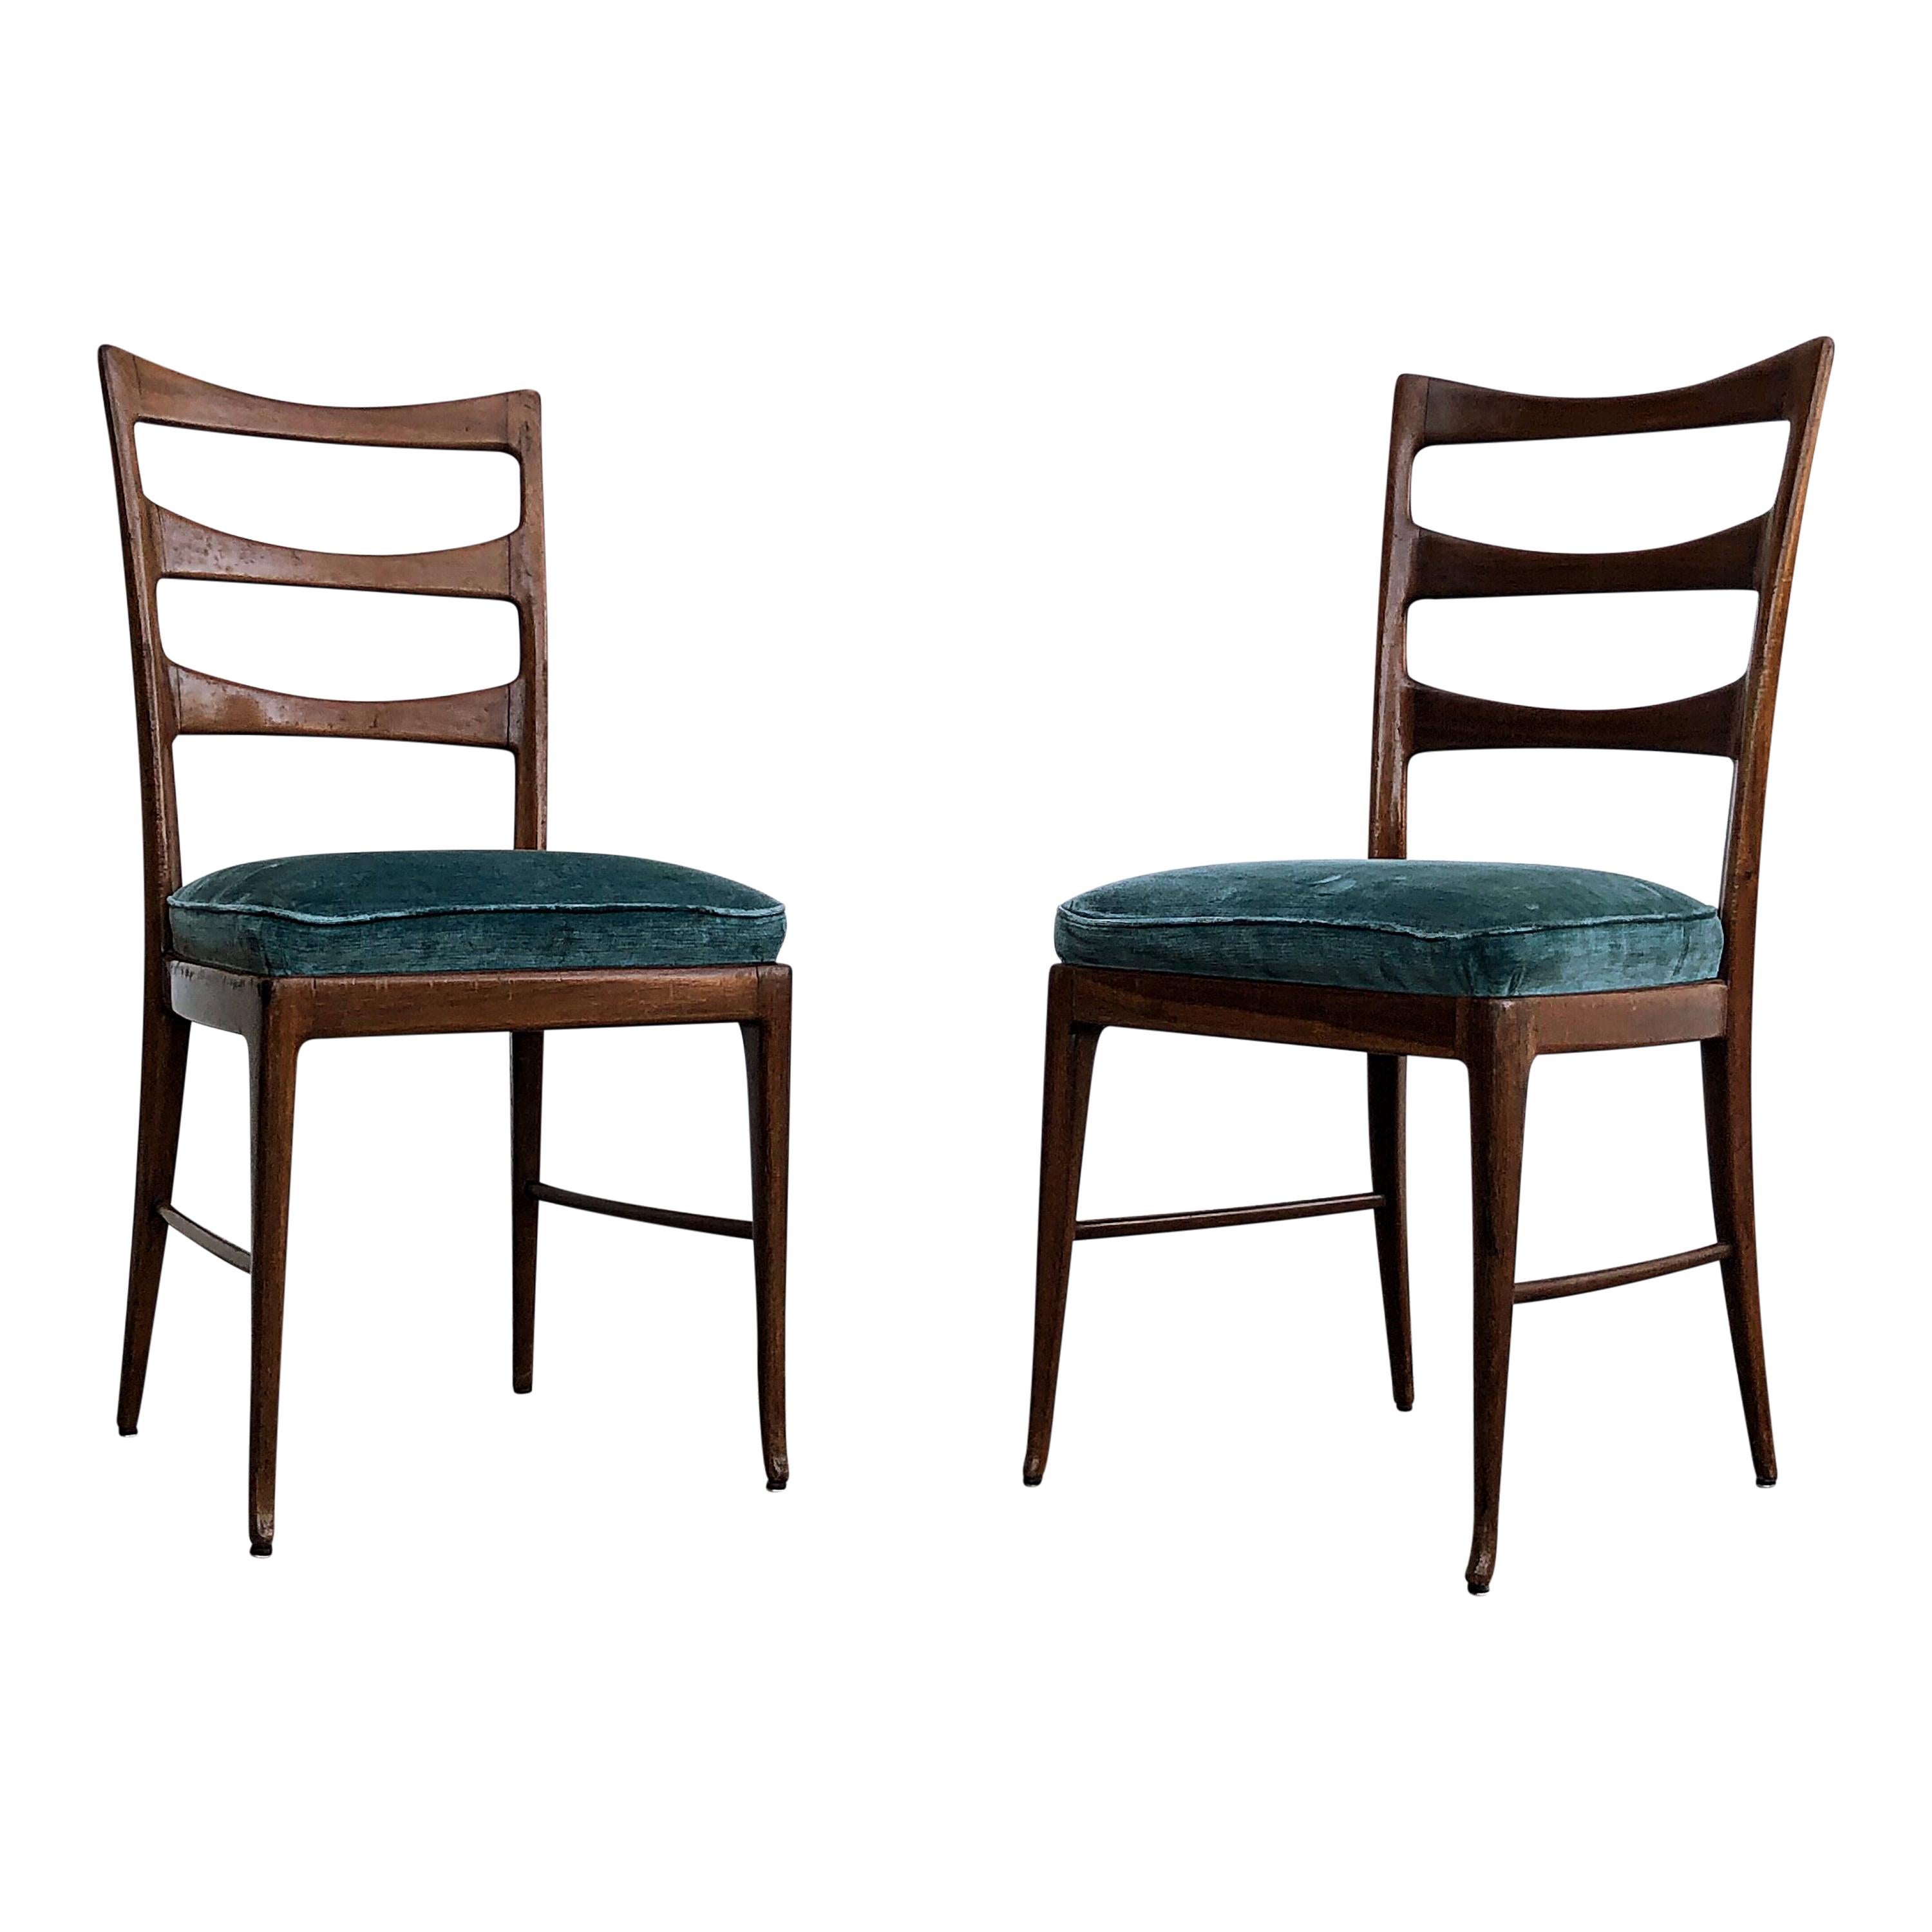 Sculptural handcrafted dining chairs by Paolo Buffa, Italy, 1948. 
The beautifully carved high back chairs have a sophisticated sculptural quality. 
The back composed of three lozenge shaped cross braces joined to the curved and pointed uprights,